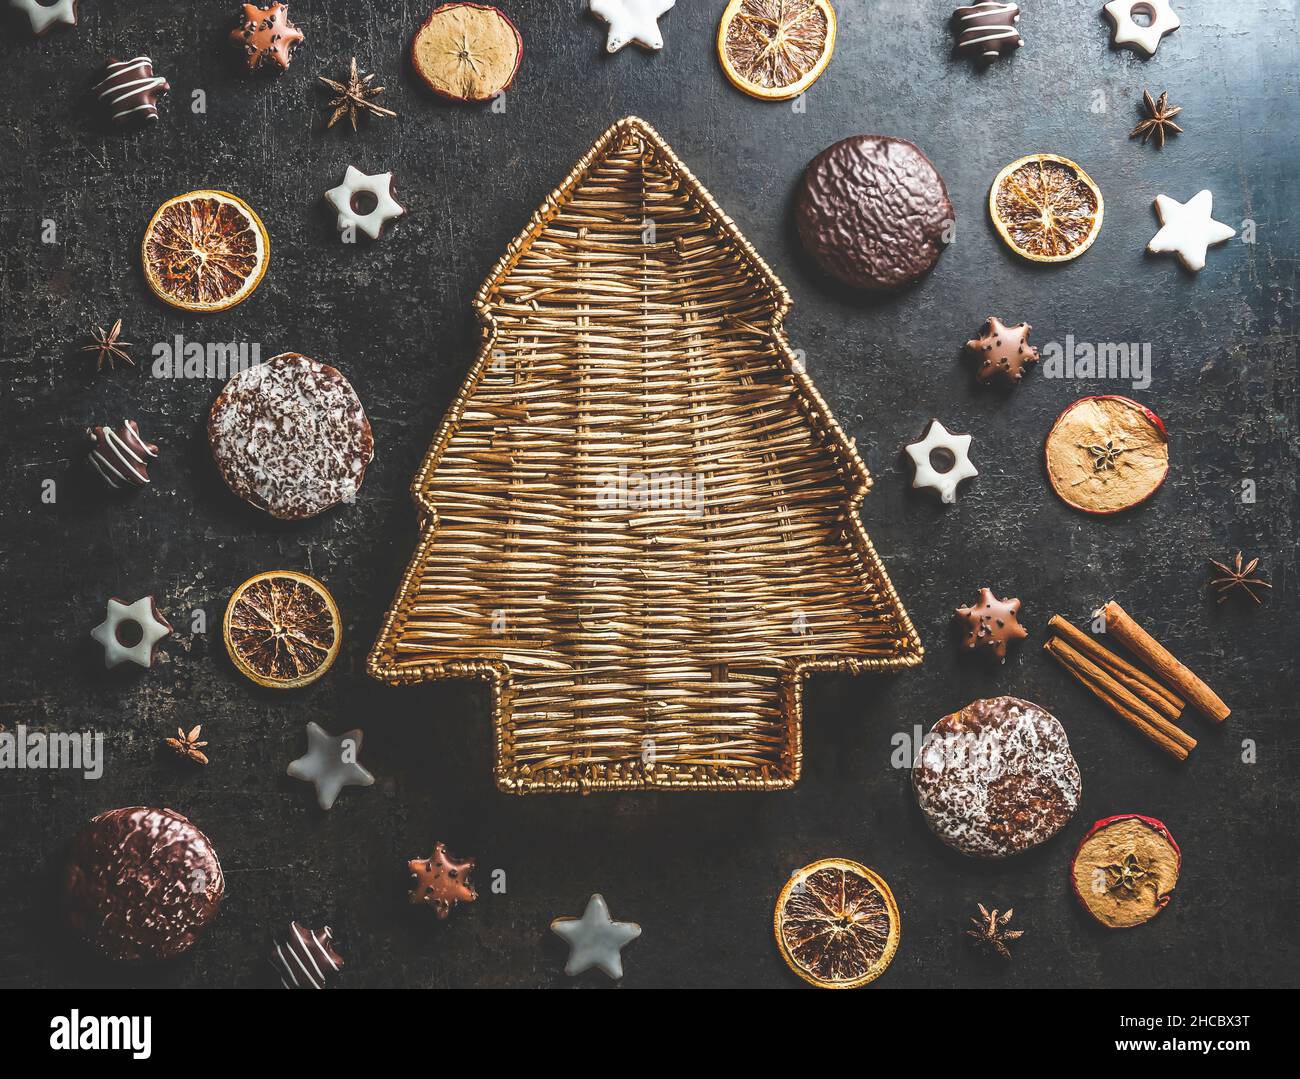 Christmas tree shaped wooden tray on dark concrete table with gingerbread, cookies, dried orange slices and cinnamon sticks. Delicious seasonal winter Stock Photo